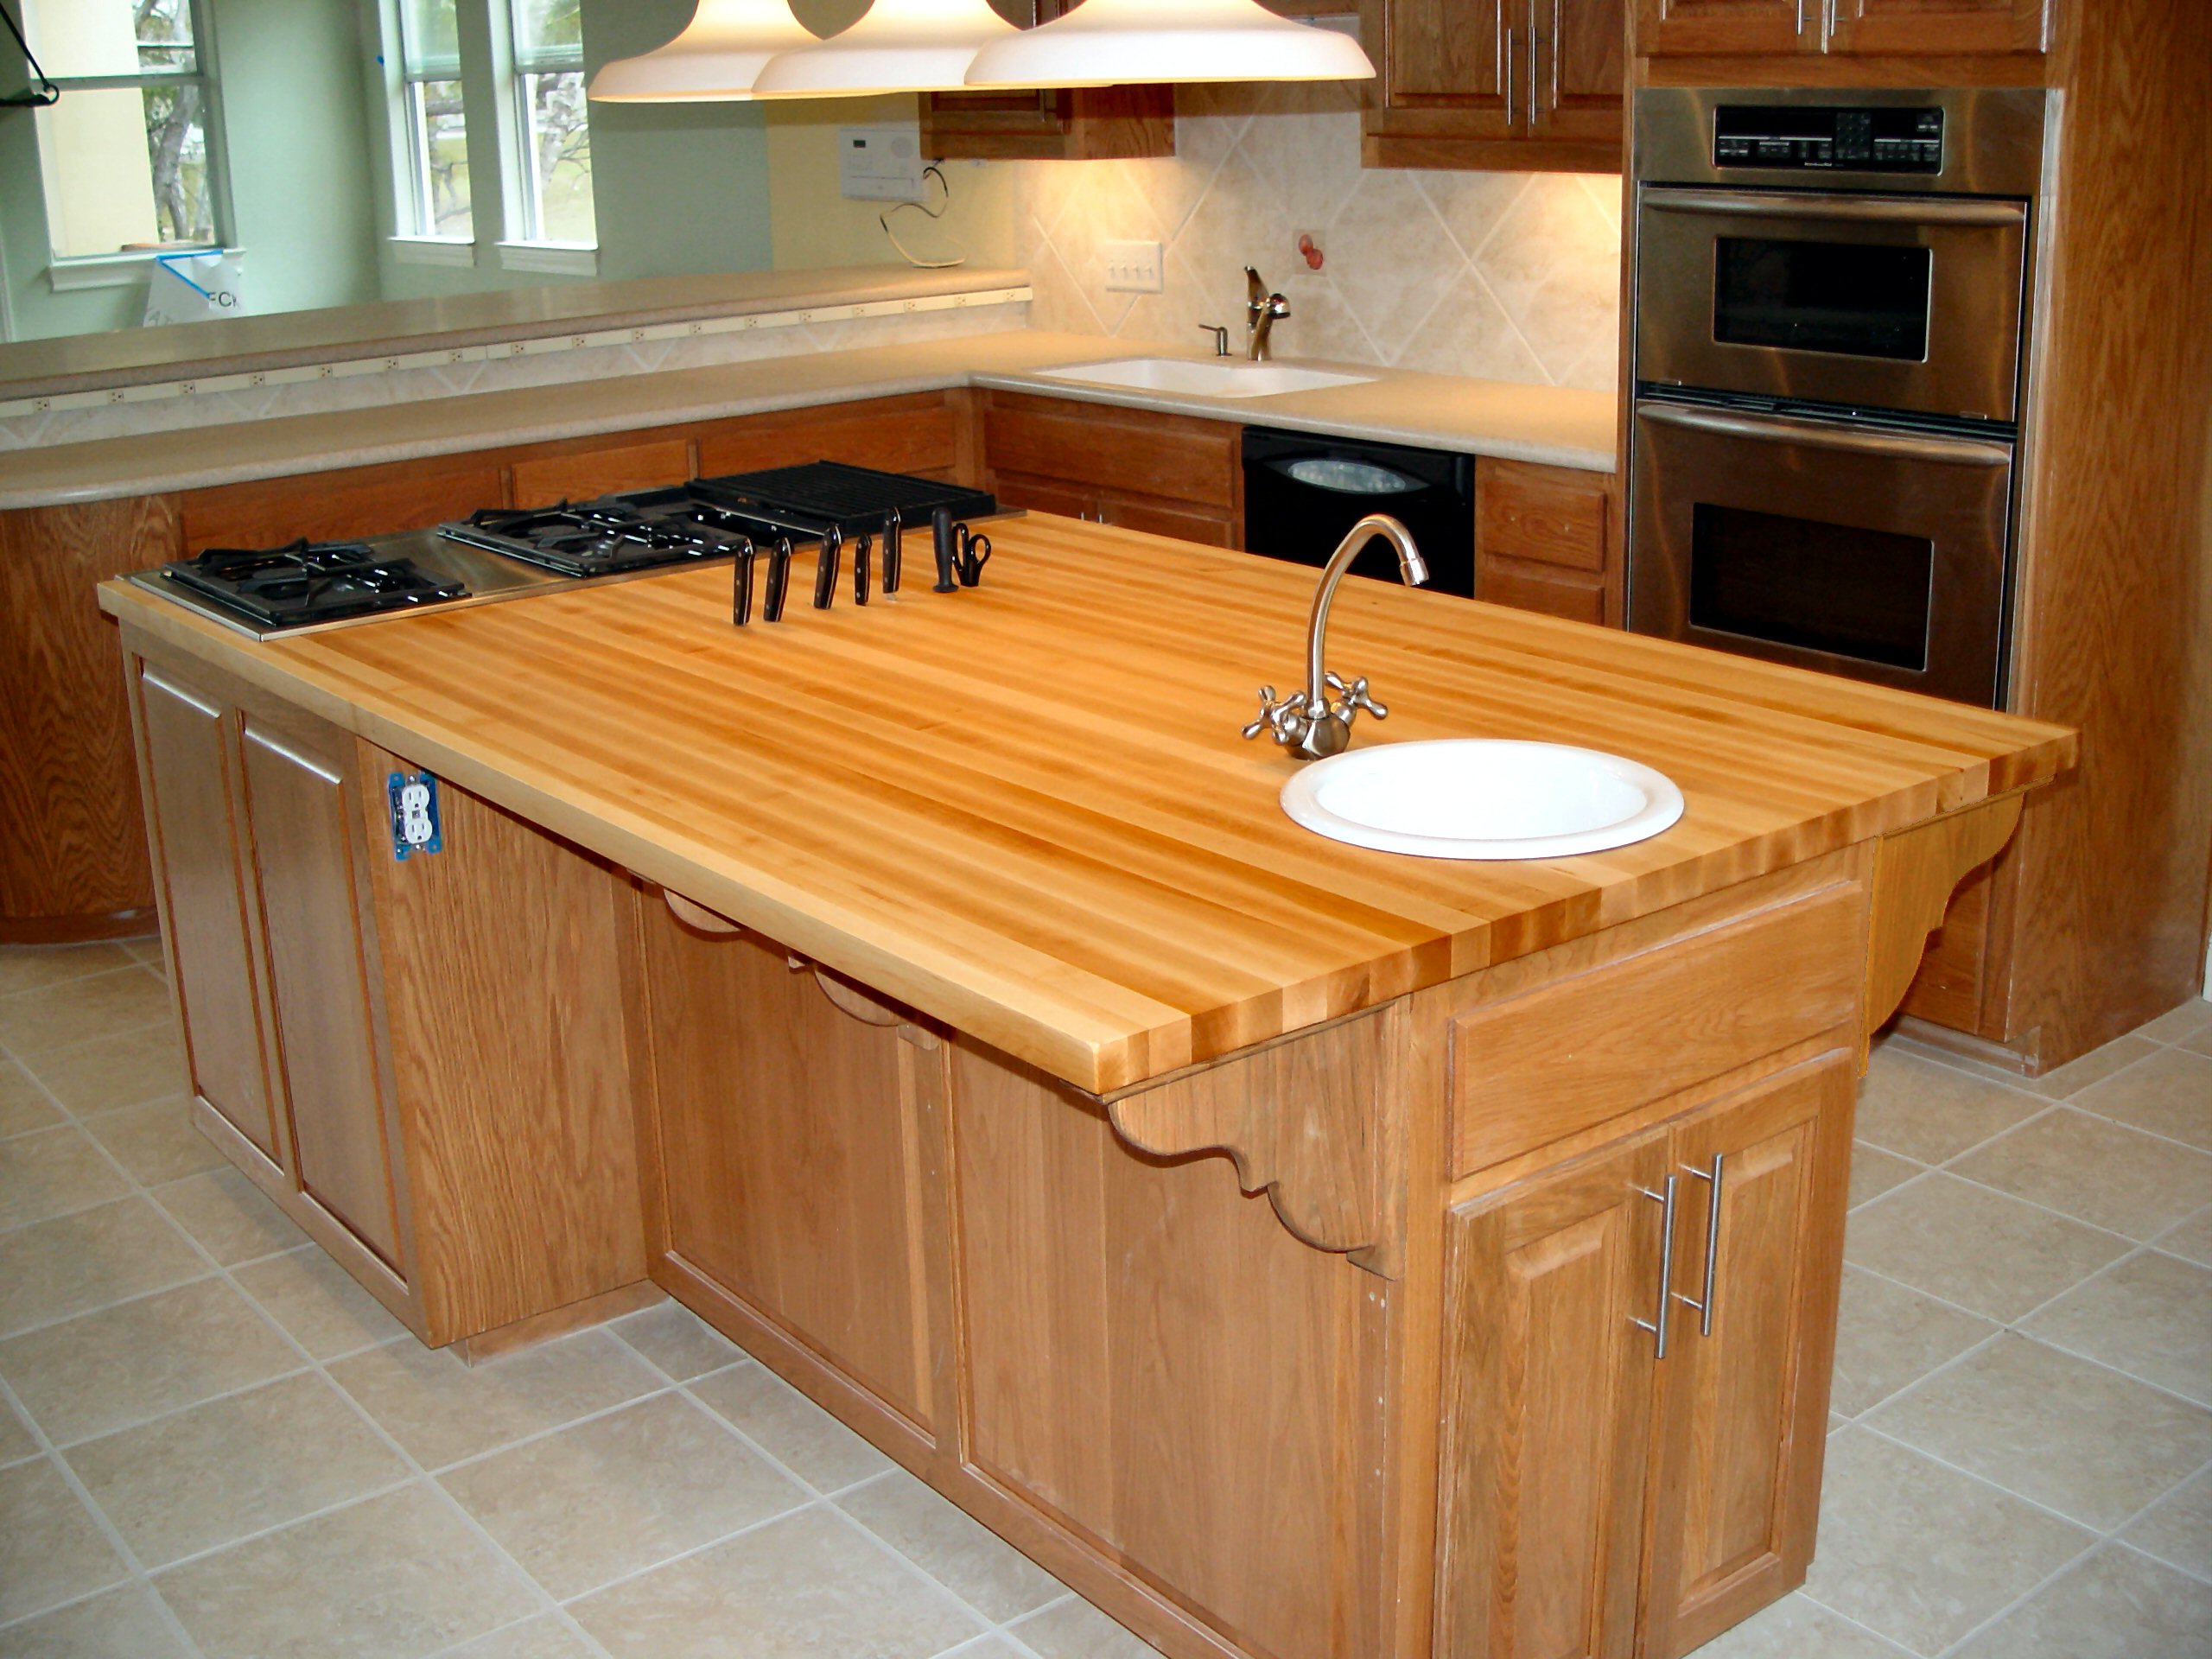 http://www.devoswoodworking.com/images/dcw/photo-gallery/wood-countertops/wood-countertops-hard-maple-photos/hard-maple-wood-countertops-img028.jpg